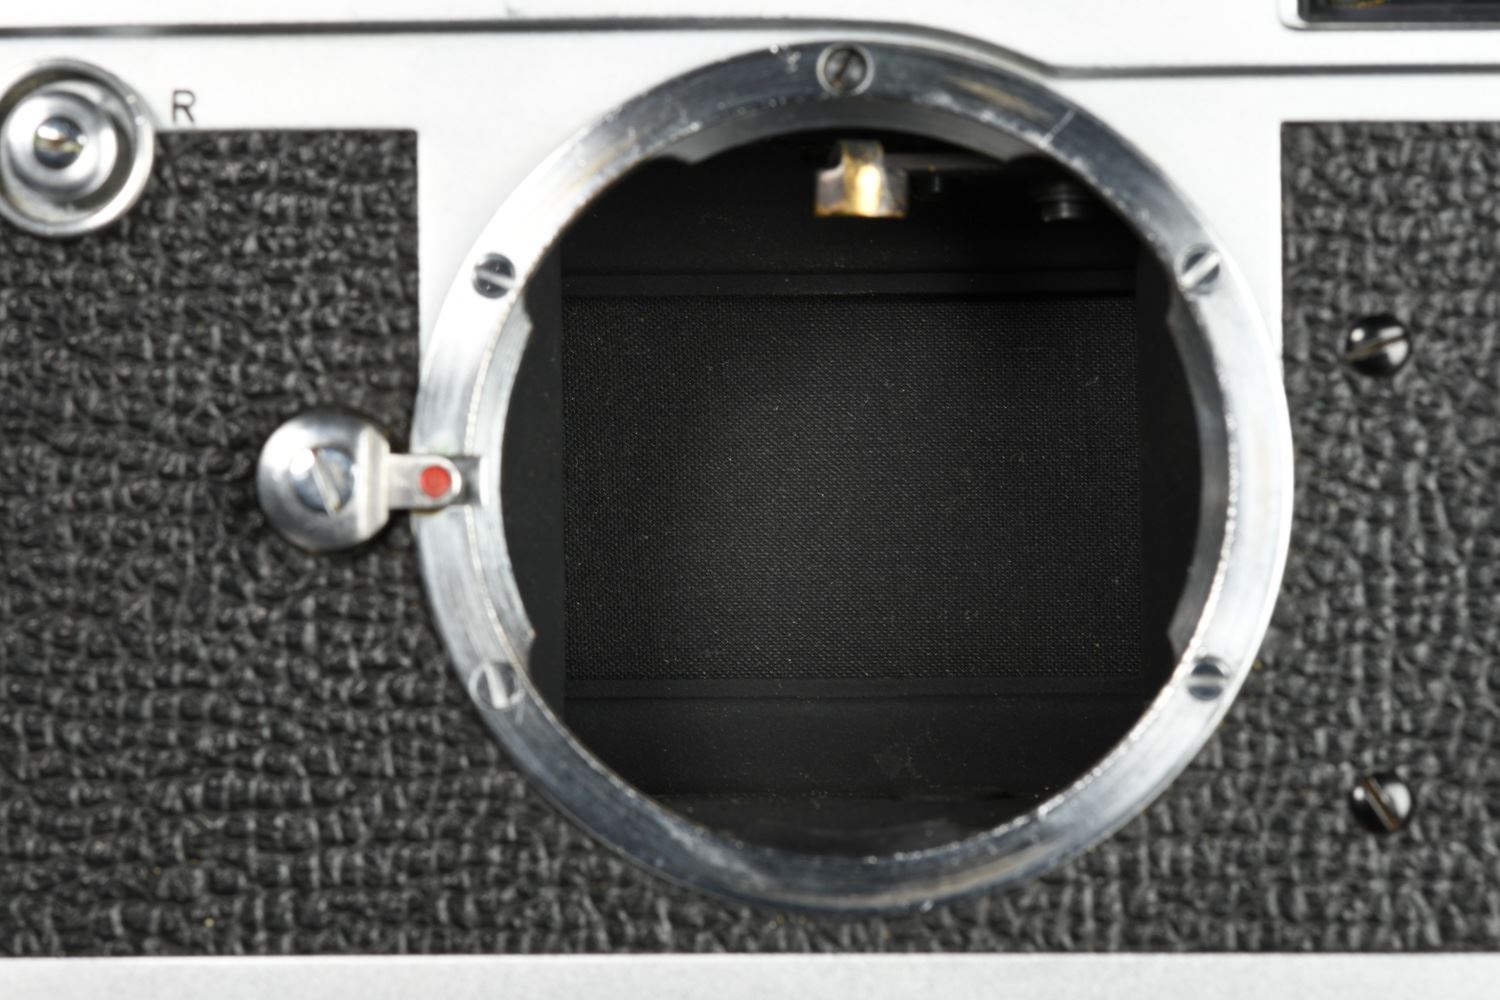 Picture of Leica M1 Button Silver